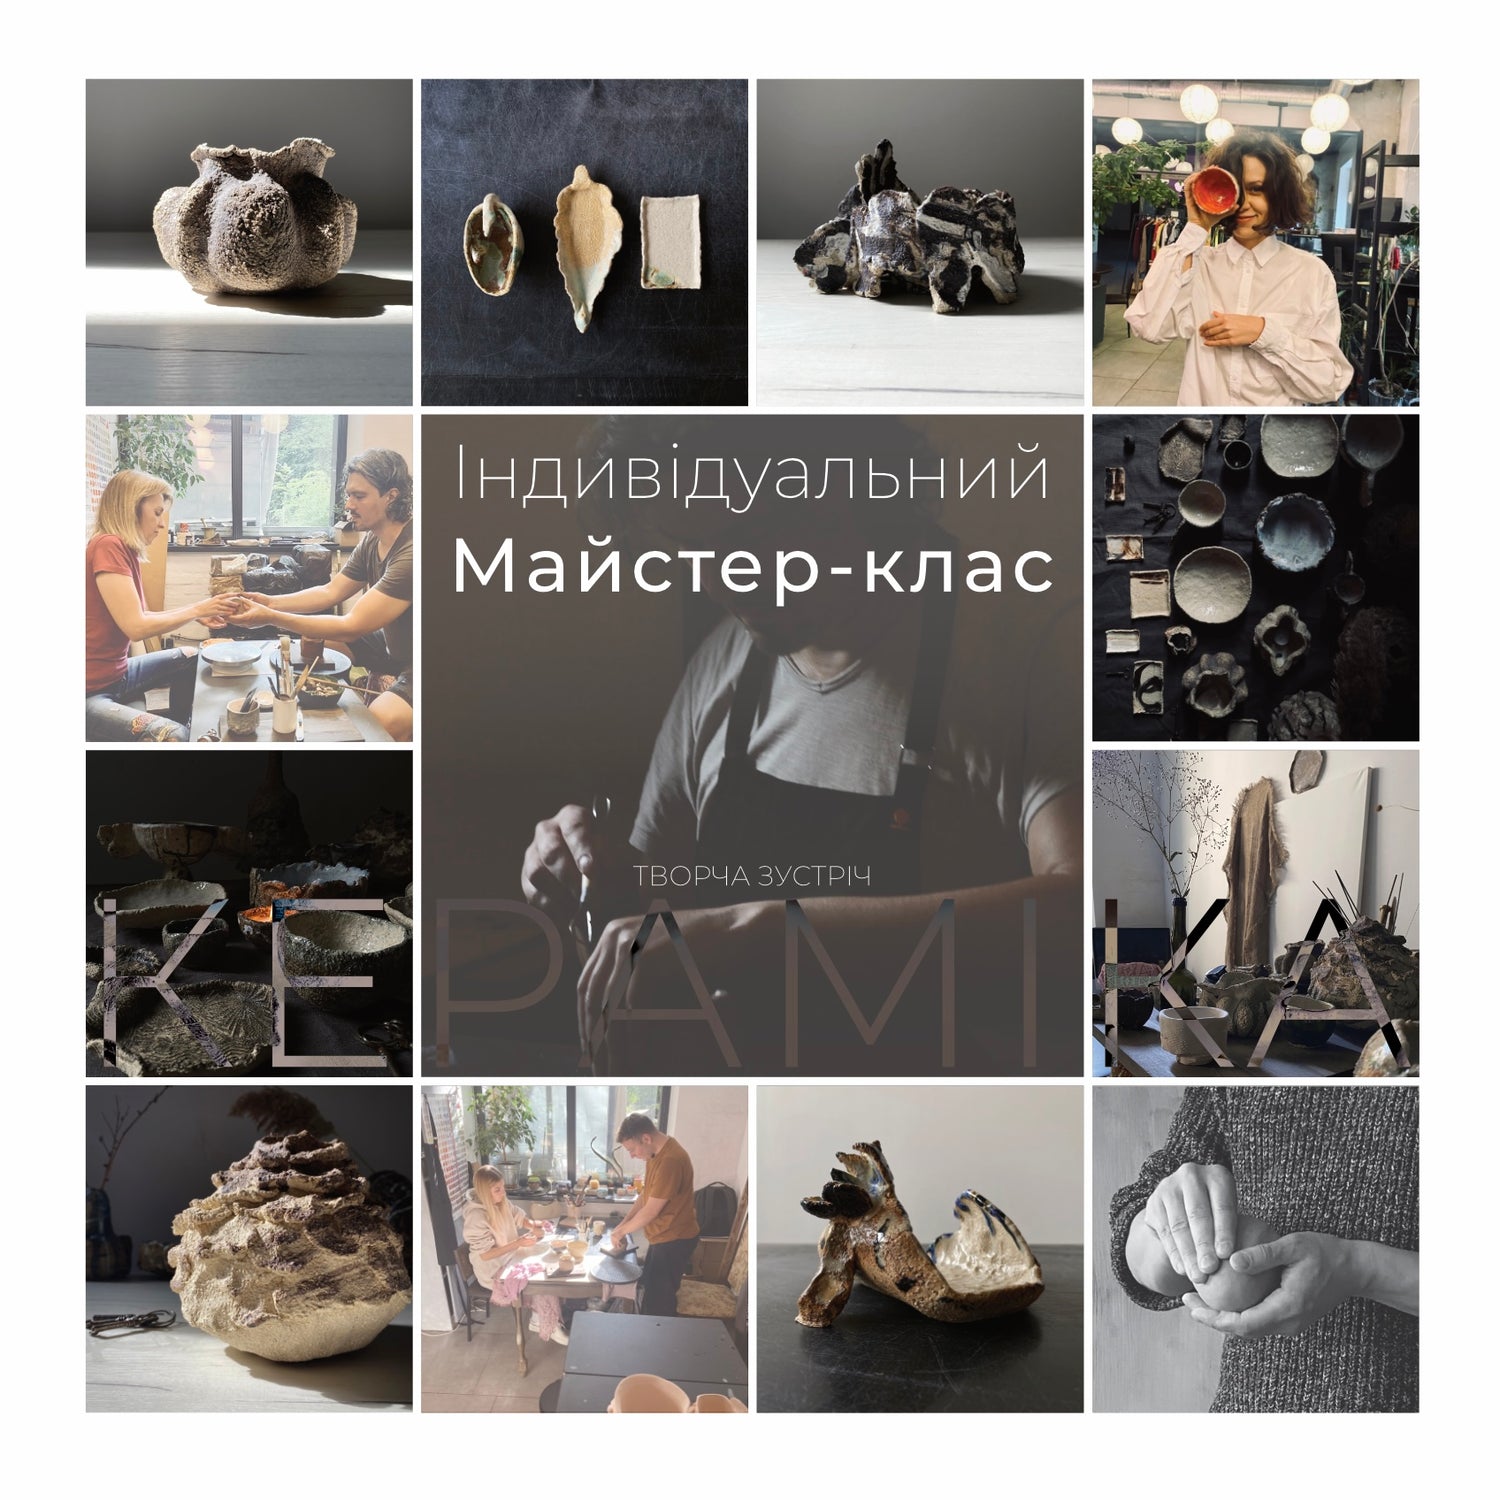 Collage of individual ceramic master classes with art pieces and people creating them. Central text reads "Individual Master Class." The theme focuses on creative meetings and ceramic art.